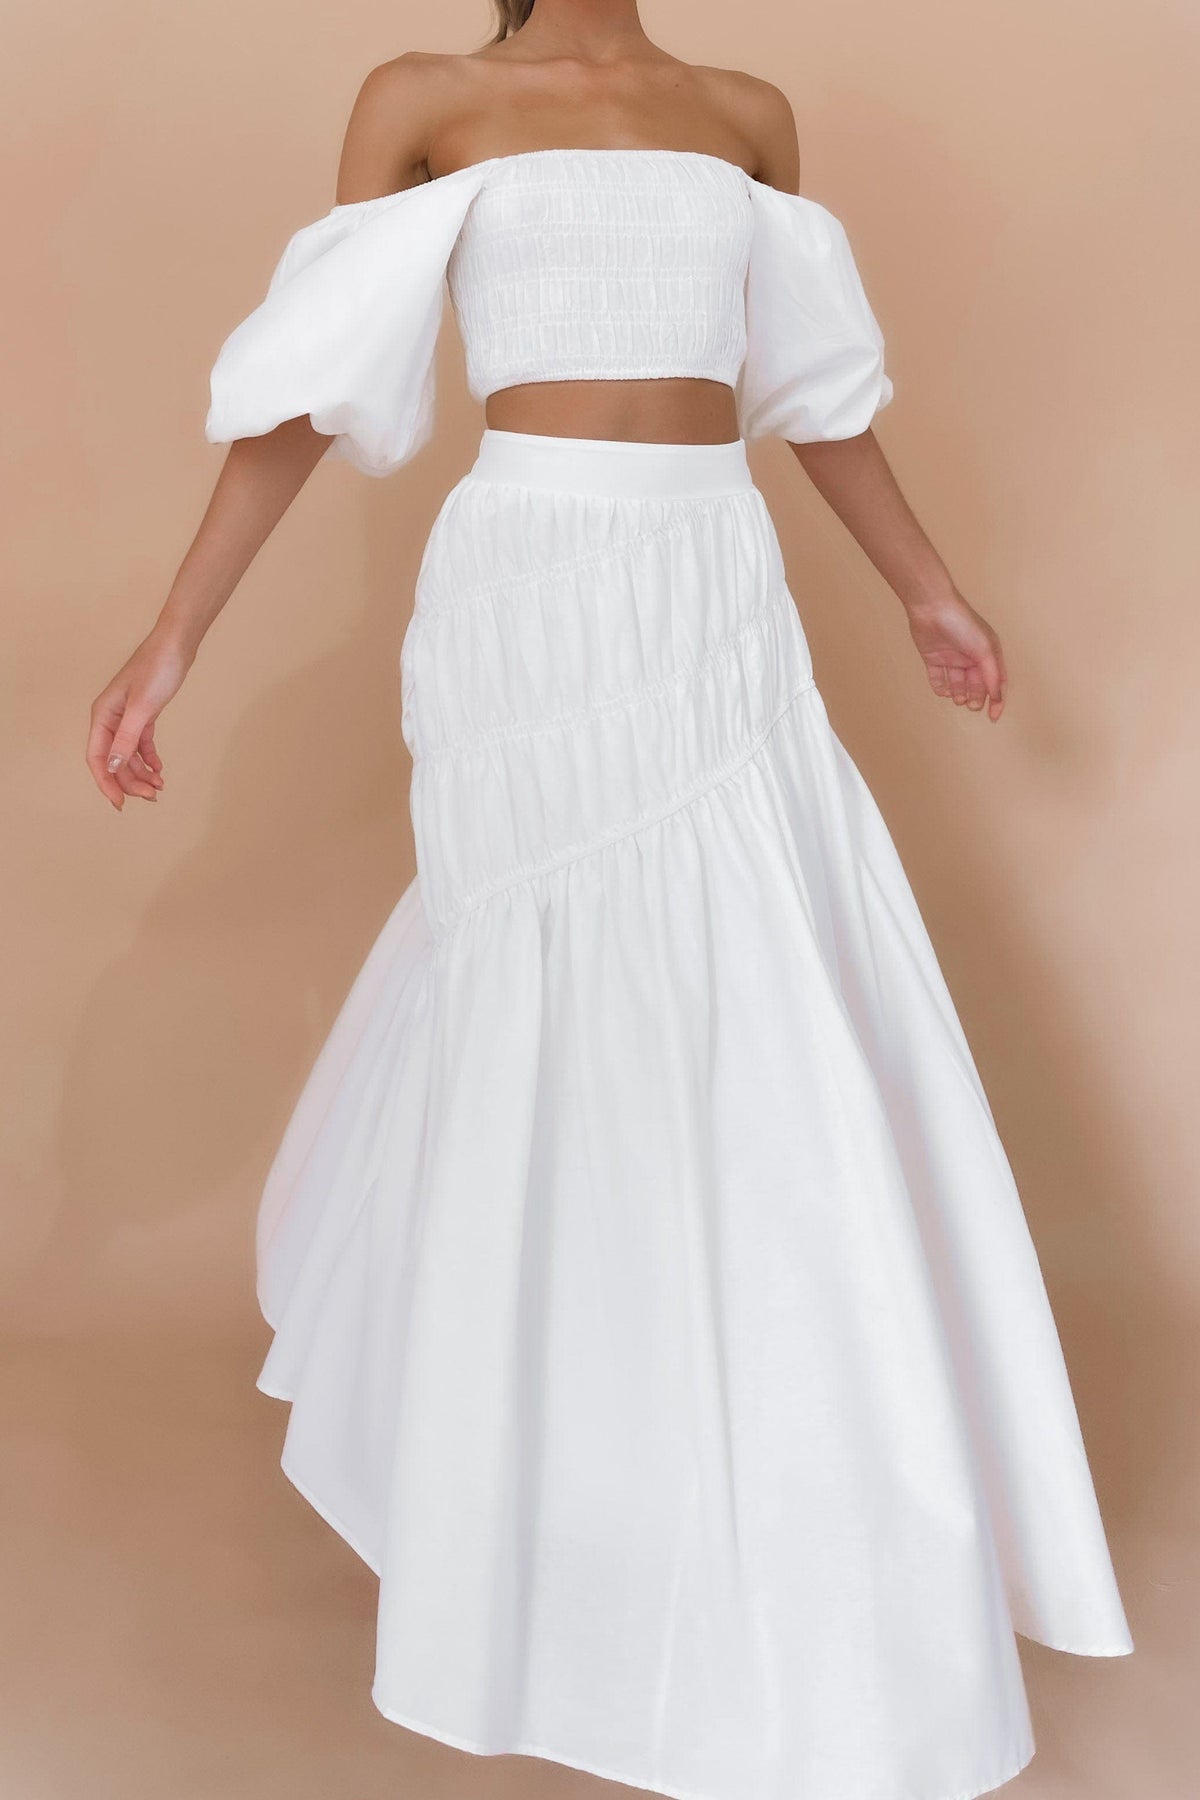 Celestie Skirt, BOTTOMS, COTTON &amp; RAYON, COTTON AND RAYON, HIGH WAISTED, MAXI SKIRT, new arrivals, RAYON AND COTTON, SKIRT, SKIRTS, WHITE, , -MISHKAH